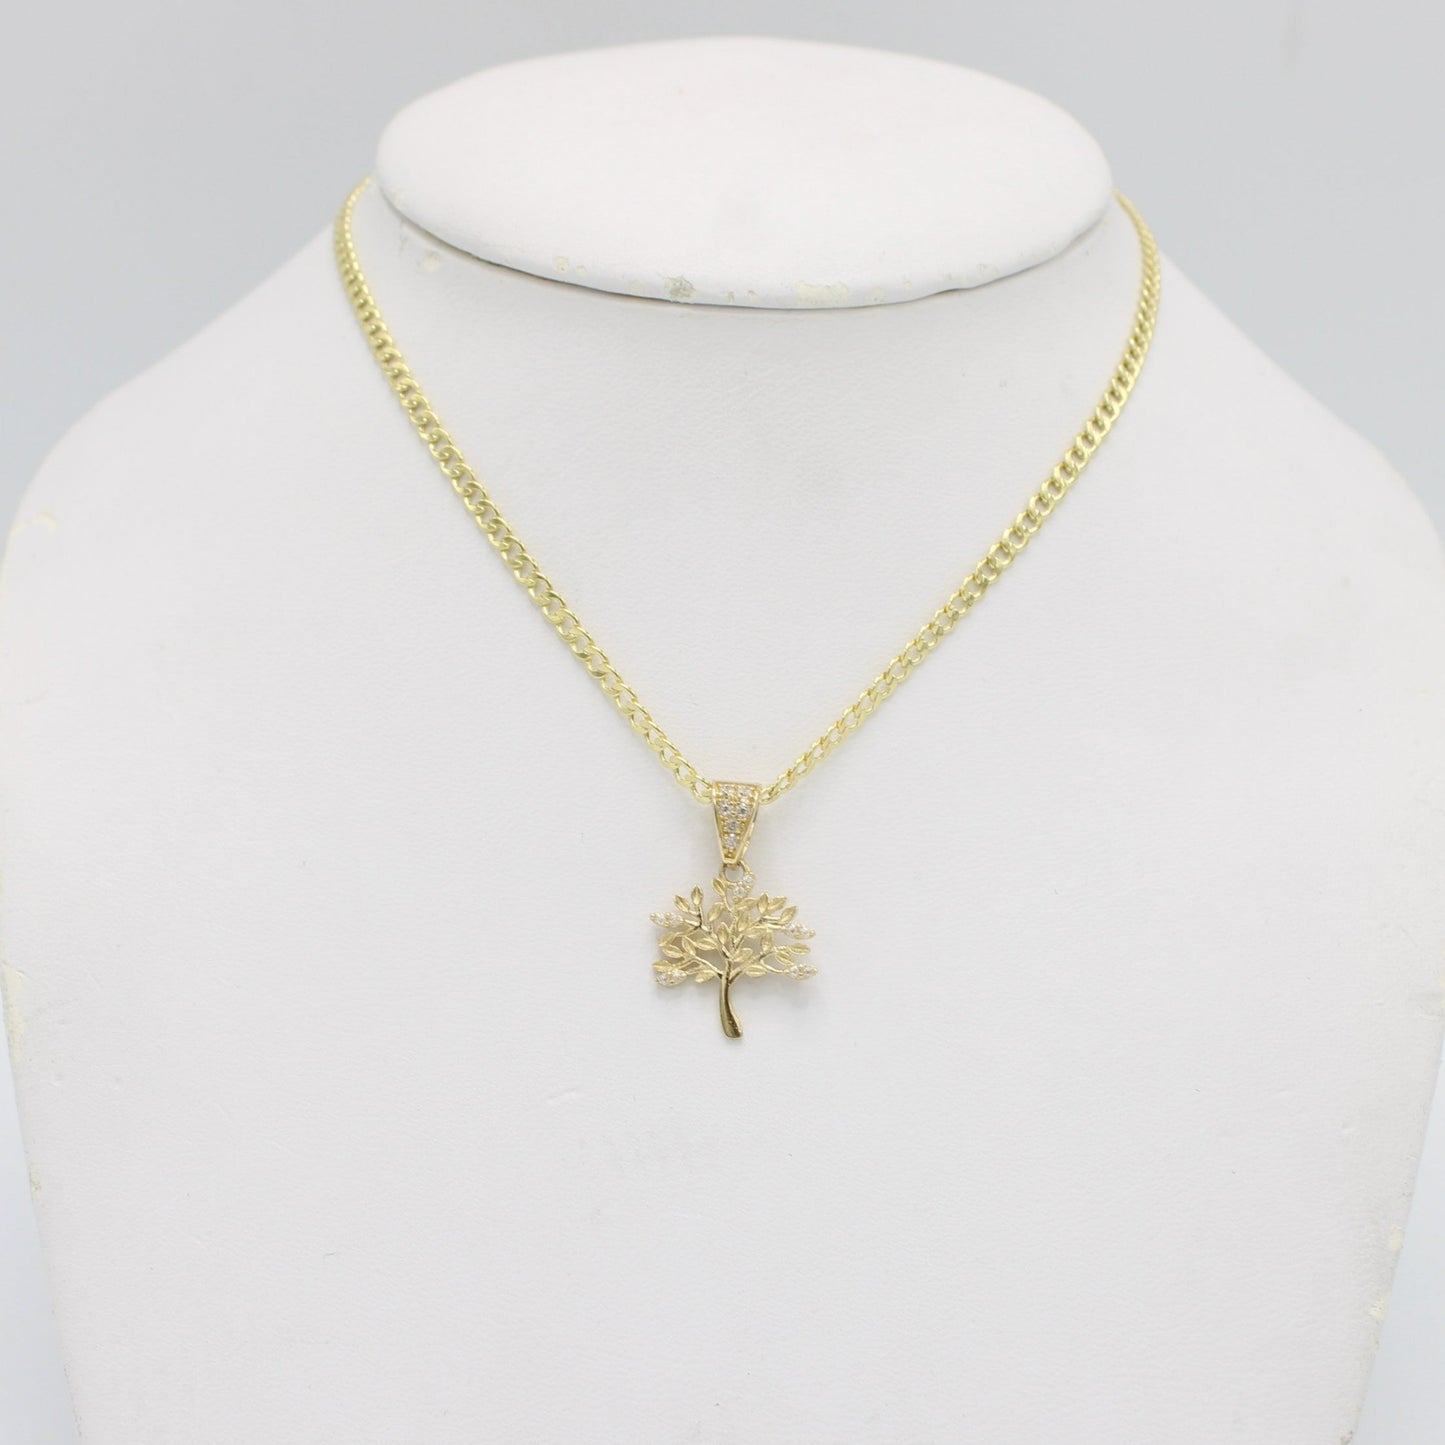 14K Tree Pendant Cz Stones with Cuban Chain Yellow Gold